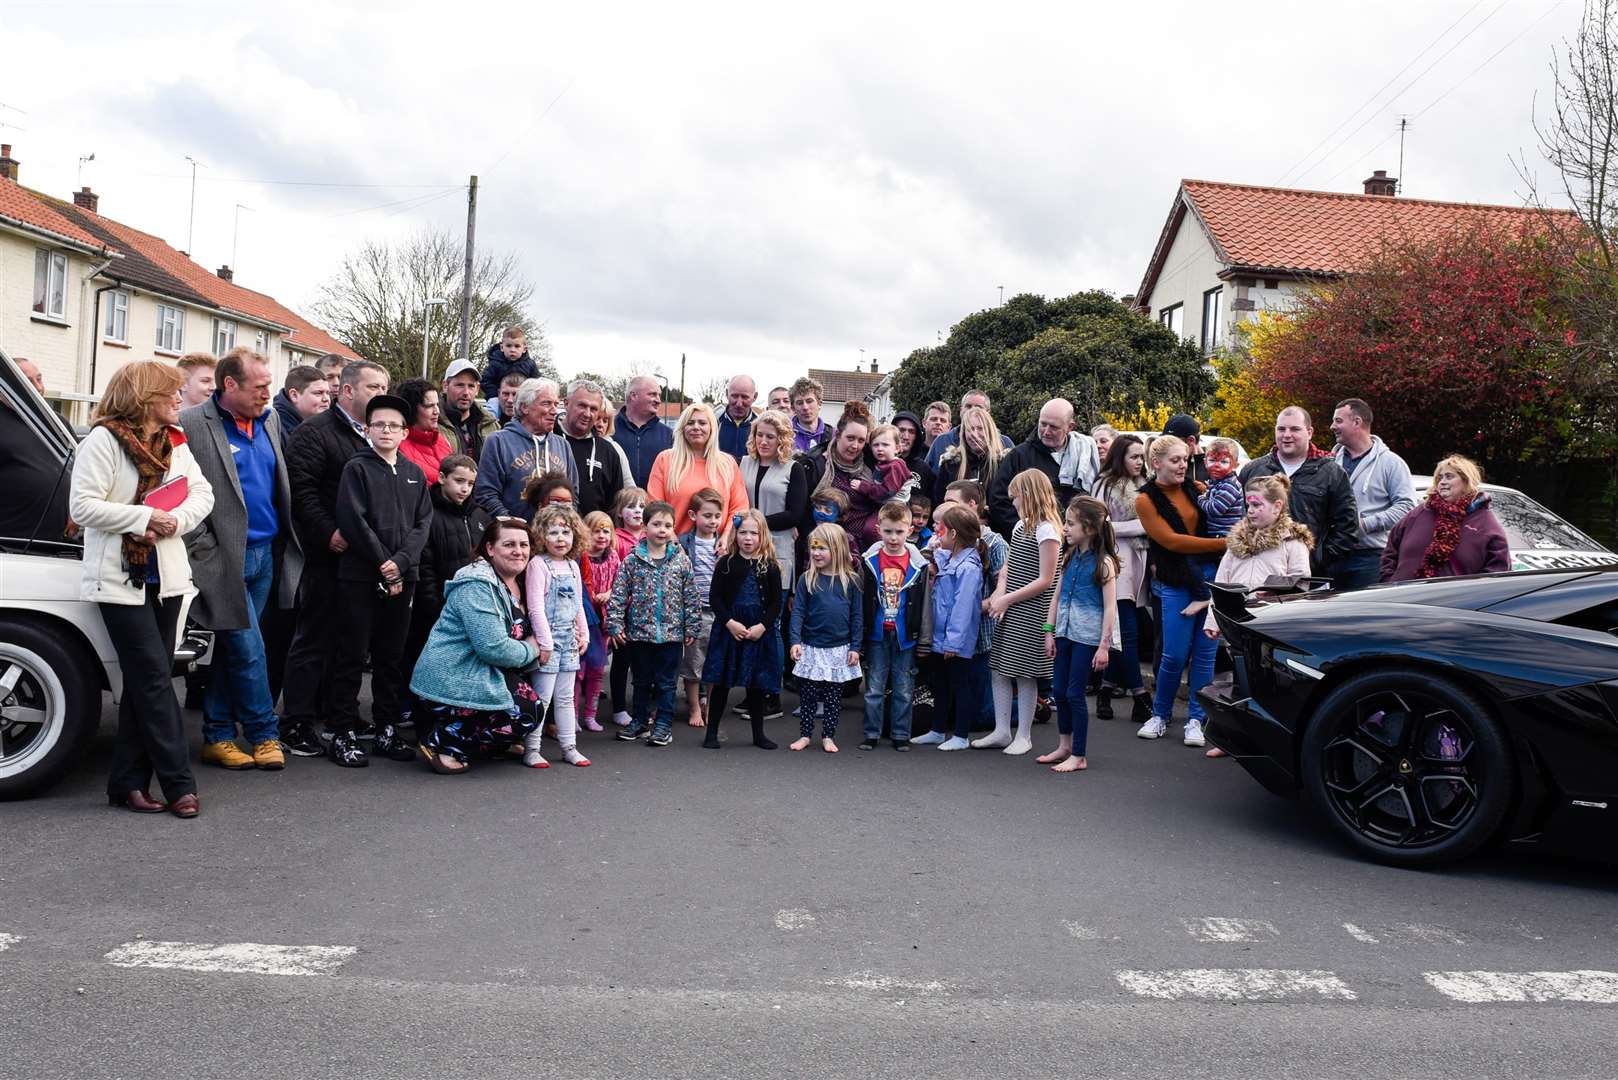 Rally cars arrived at the birthday party of a little boy 'petrol head' who captured the hearts of many on social media